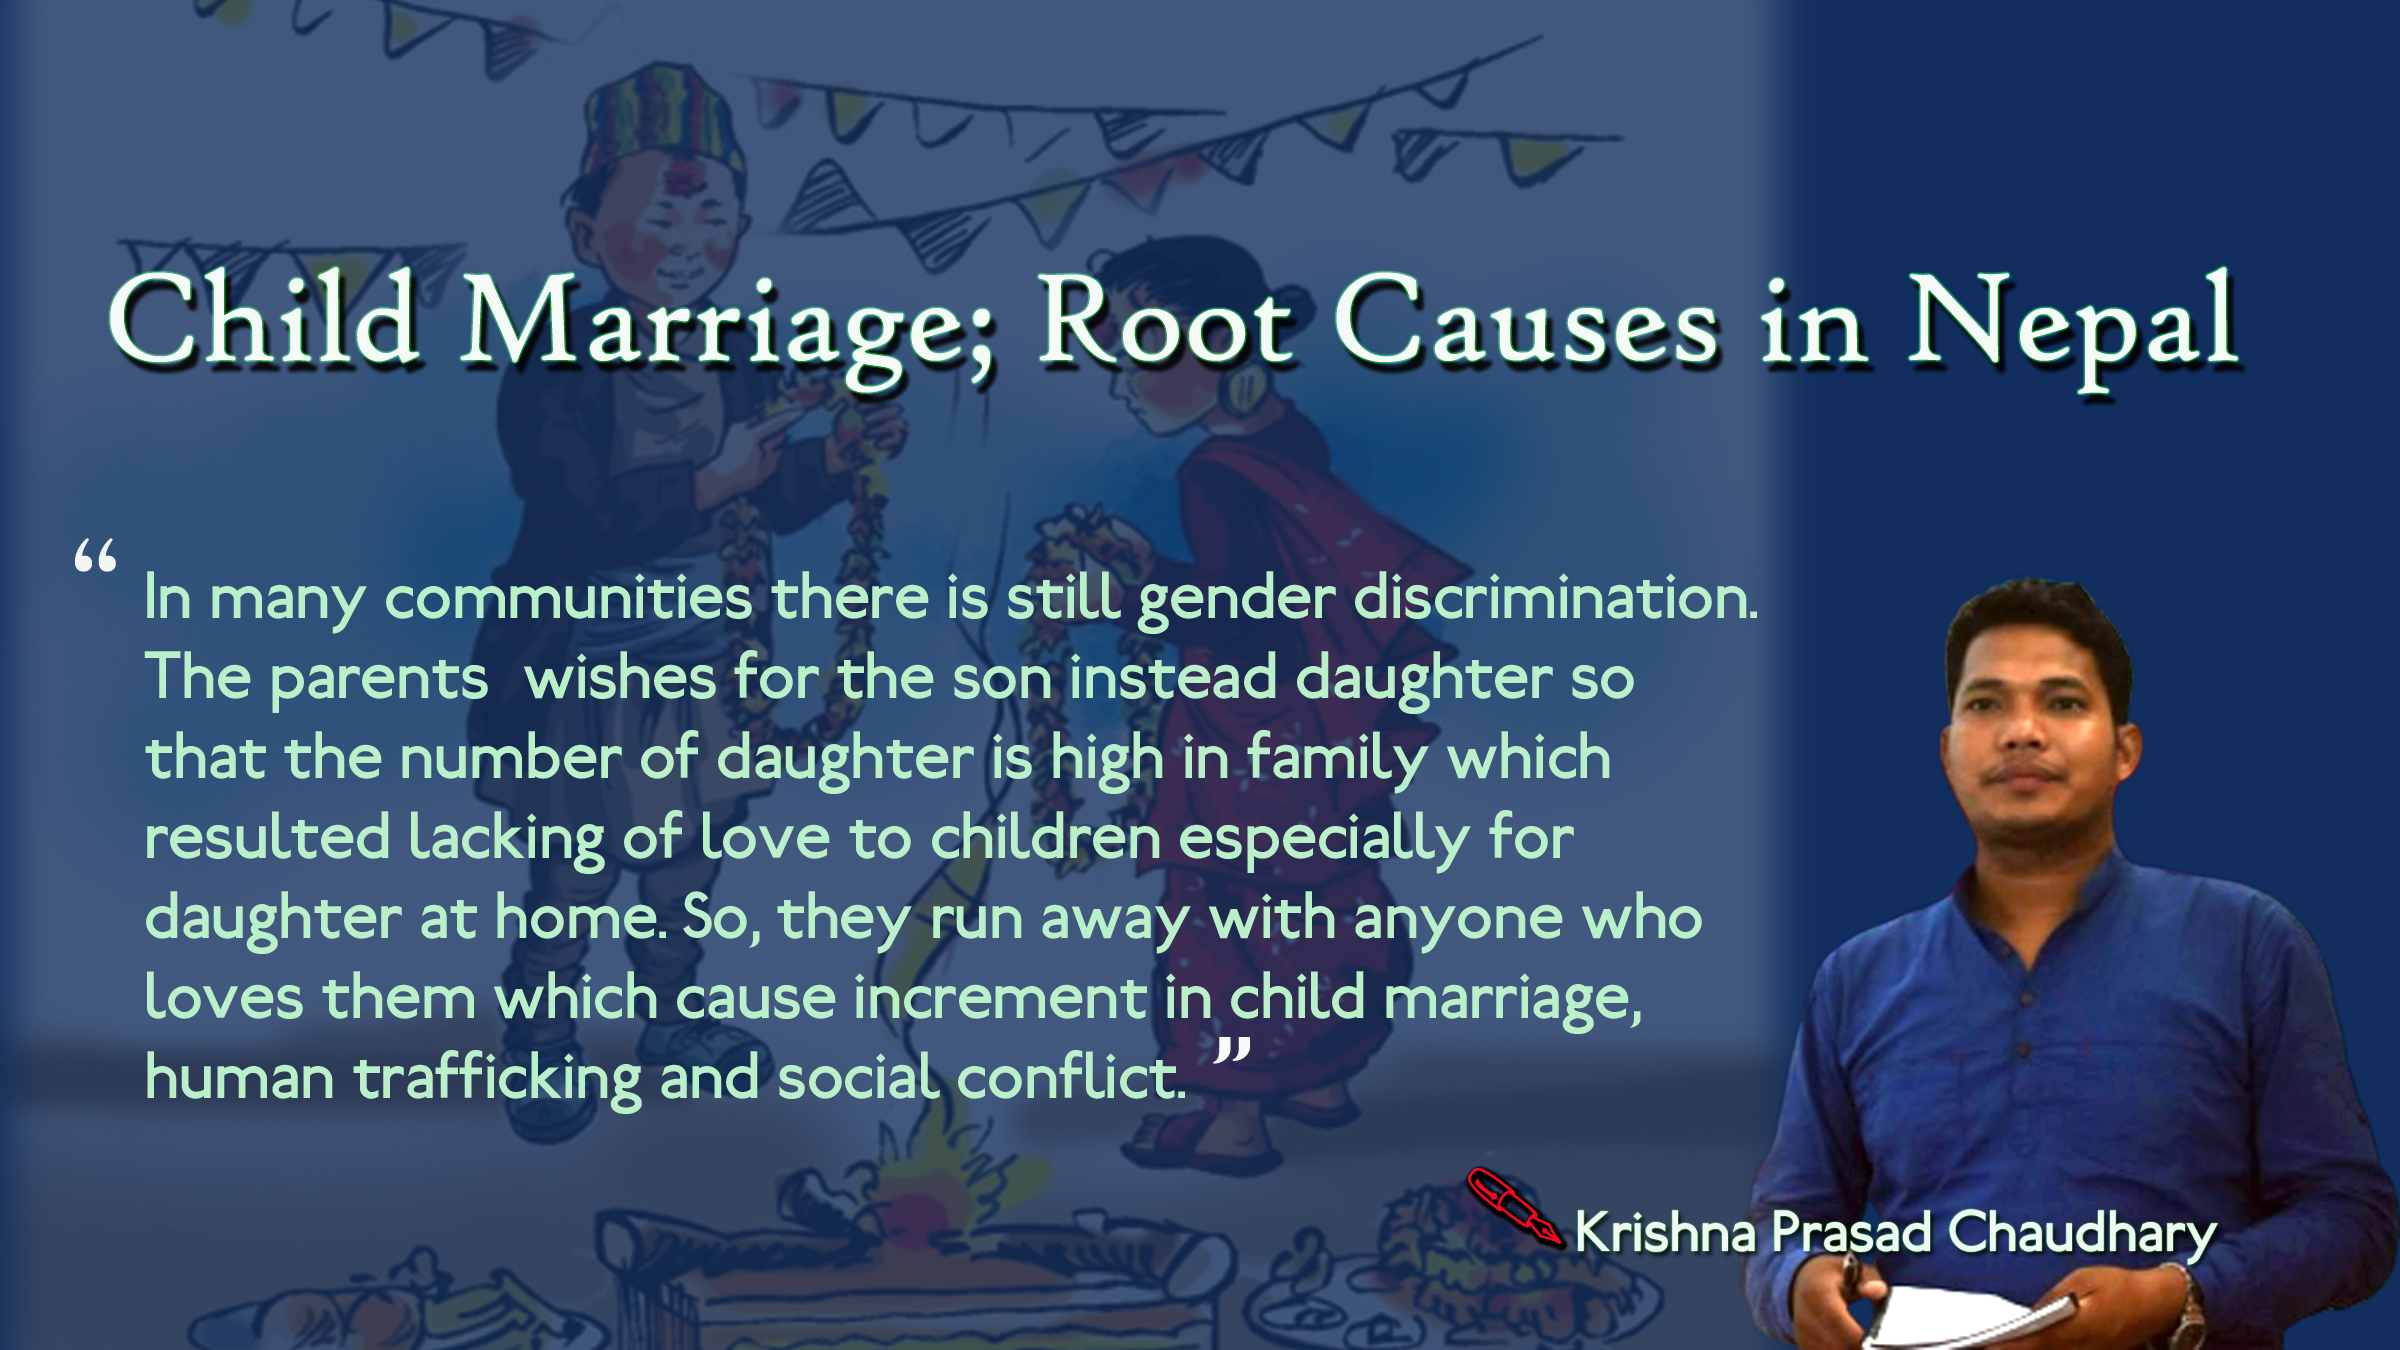 Child Marriage; Root Causes in Nepal